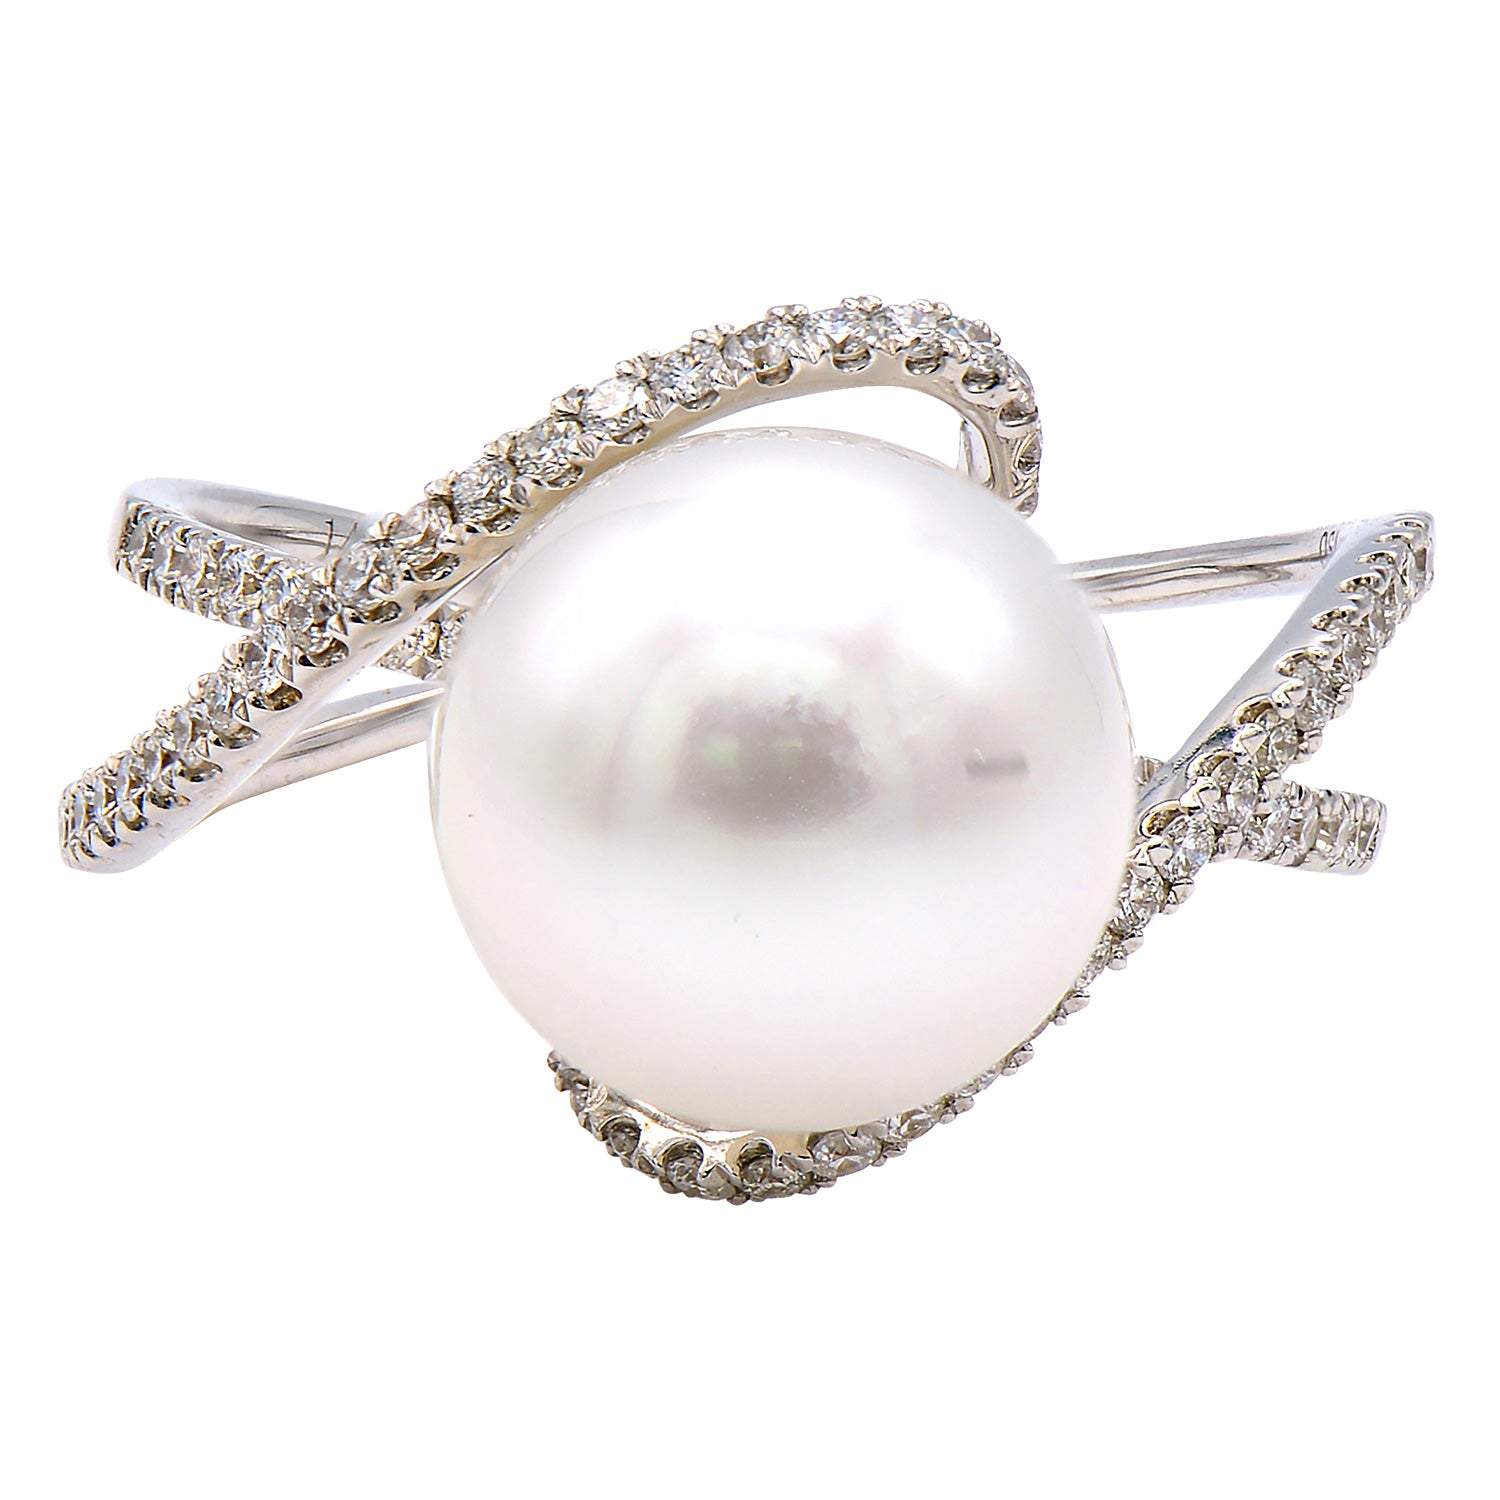 14K White Gold South Sea Pearl and Diamond Ring, 10-11mm